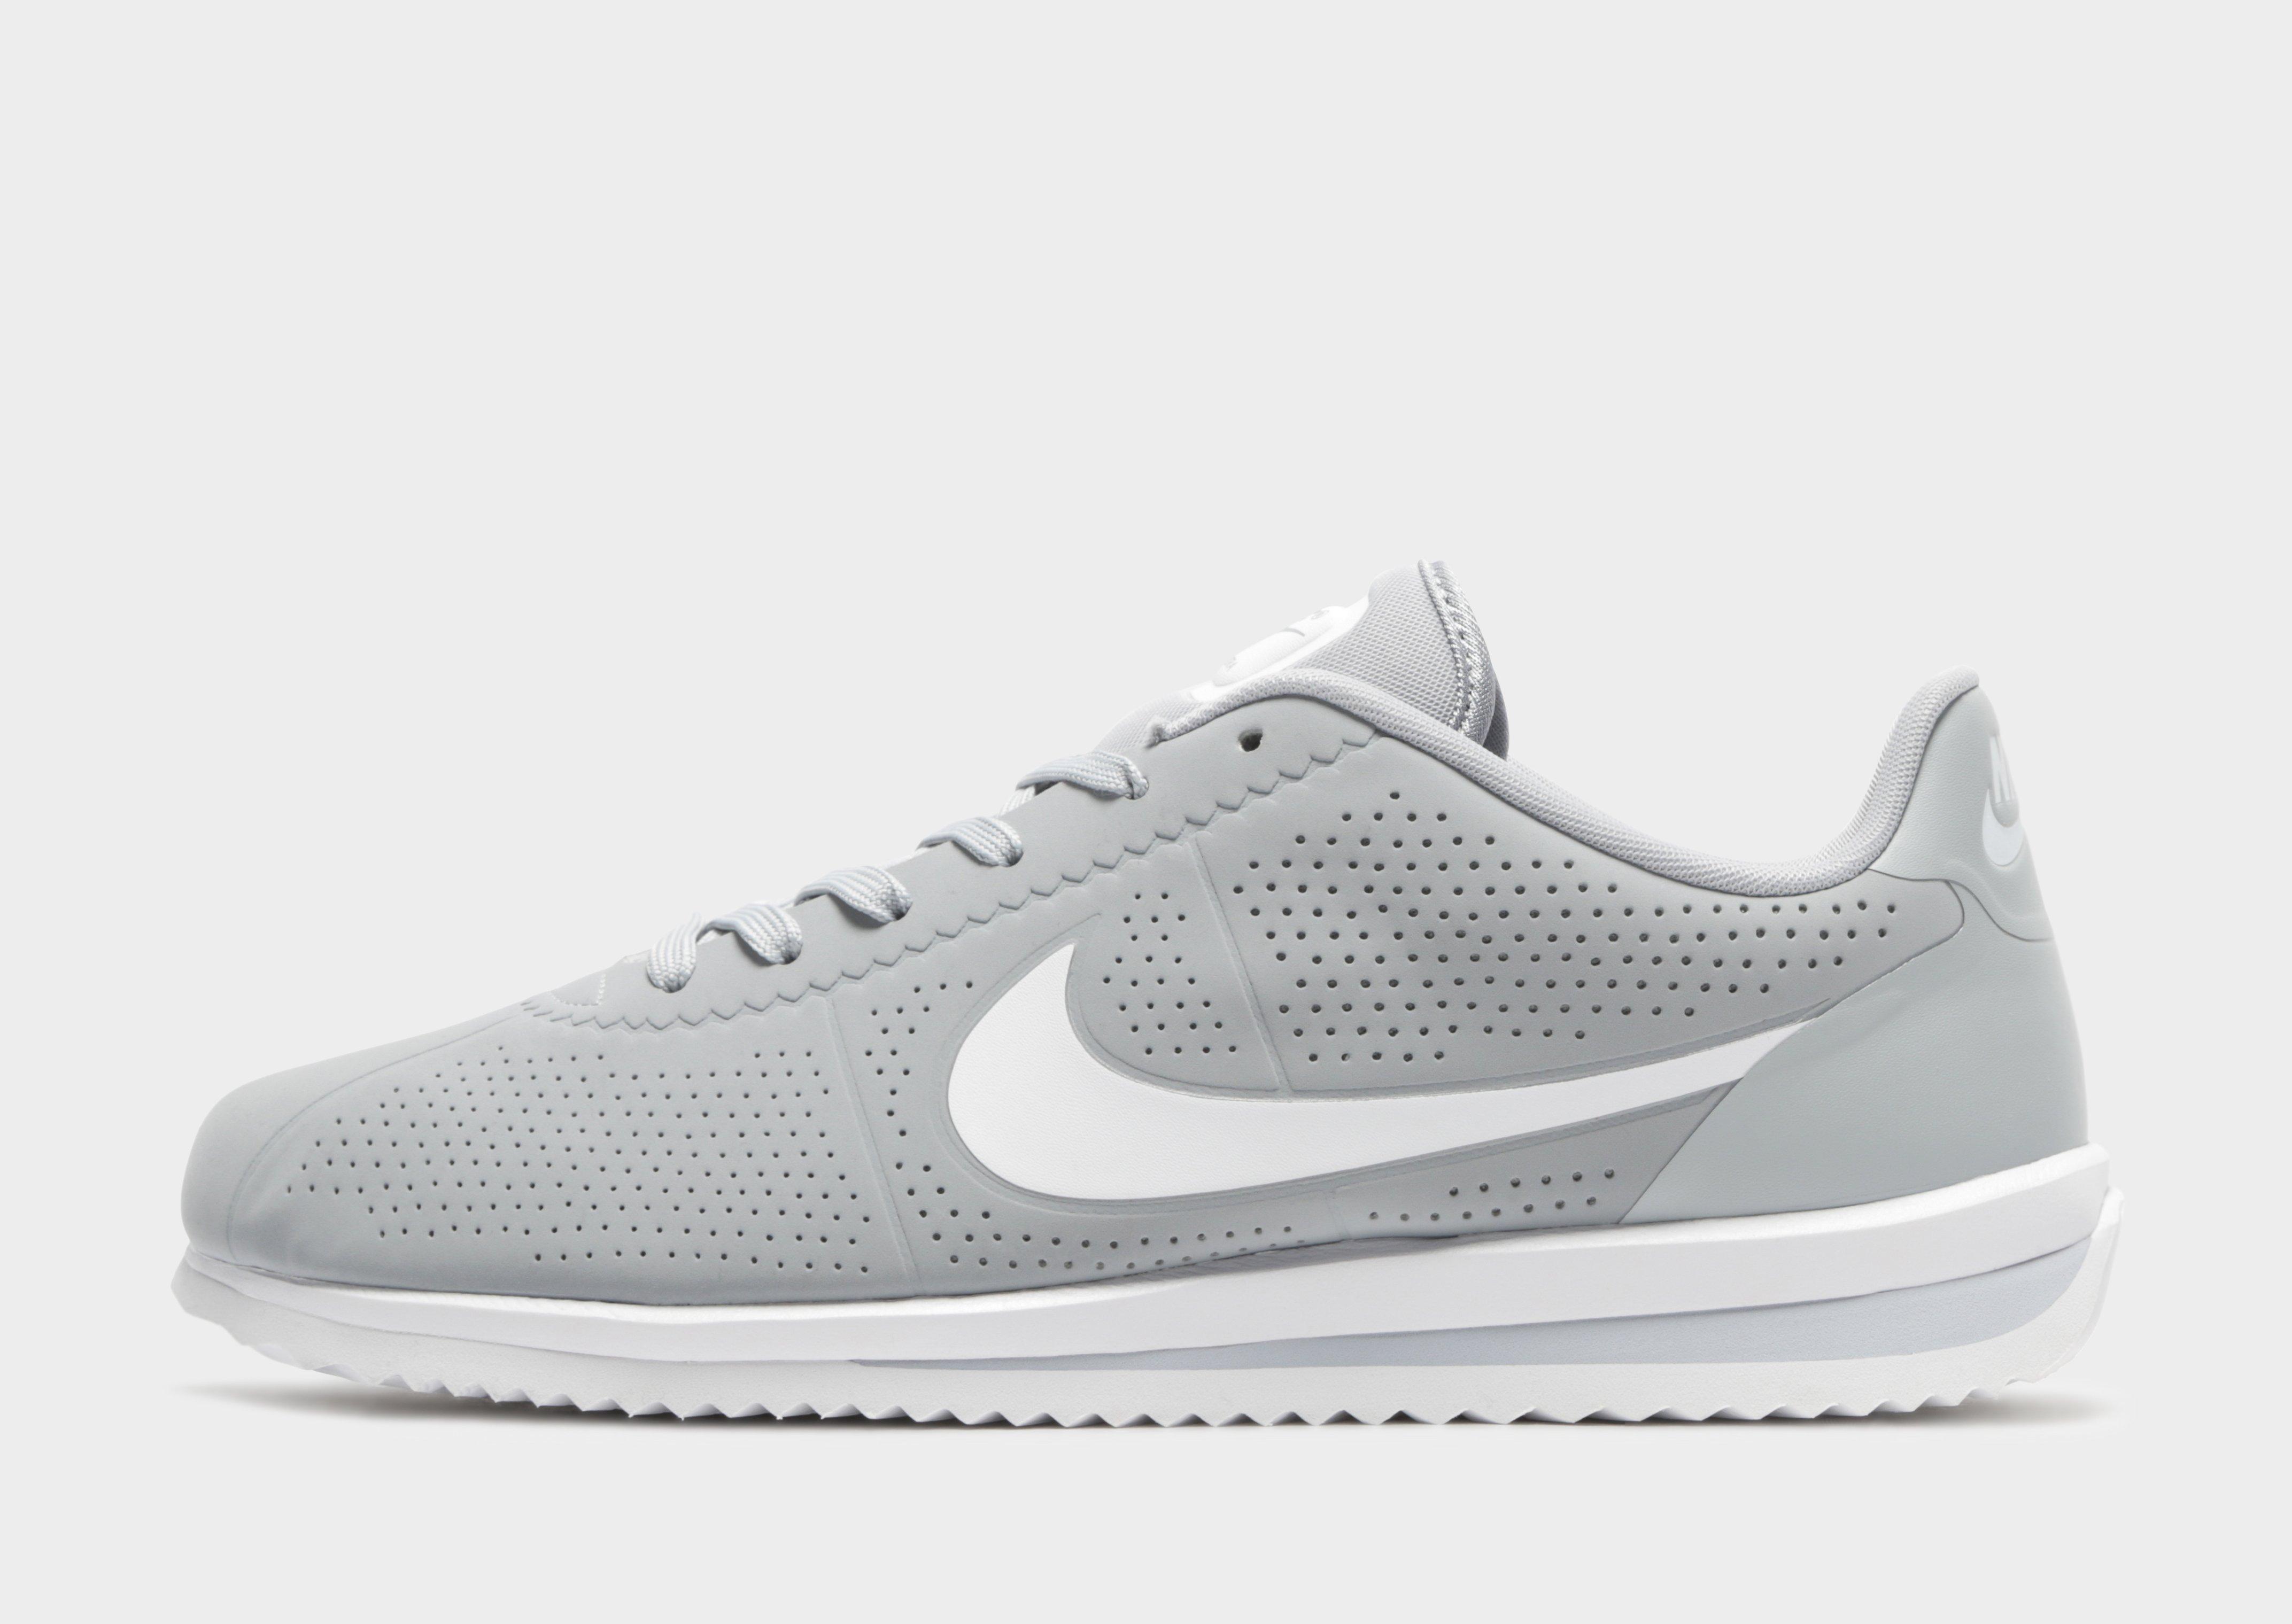 Nike Leather Cortez Ultra Moire in Grey (Grey) for Men - Lyst